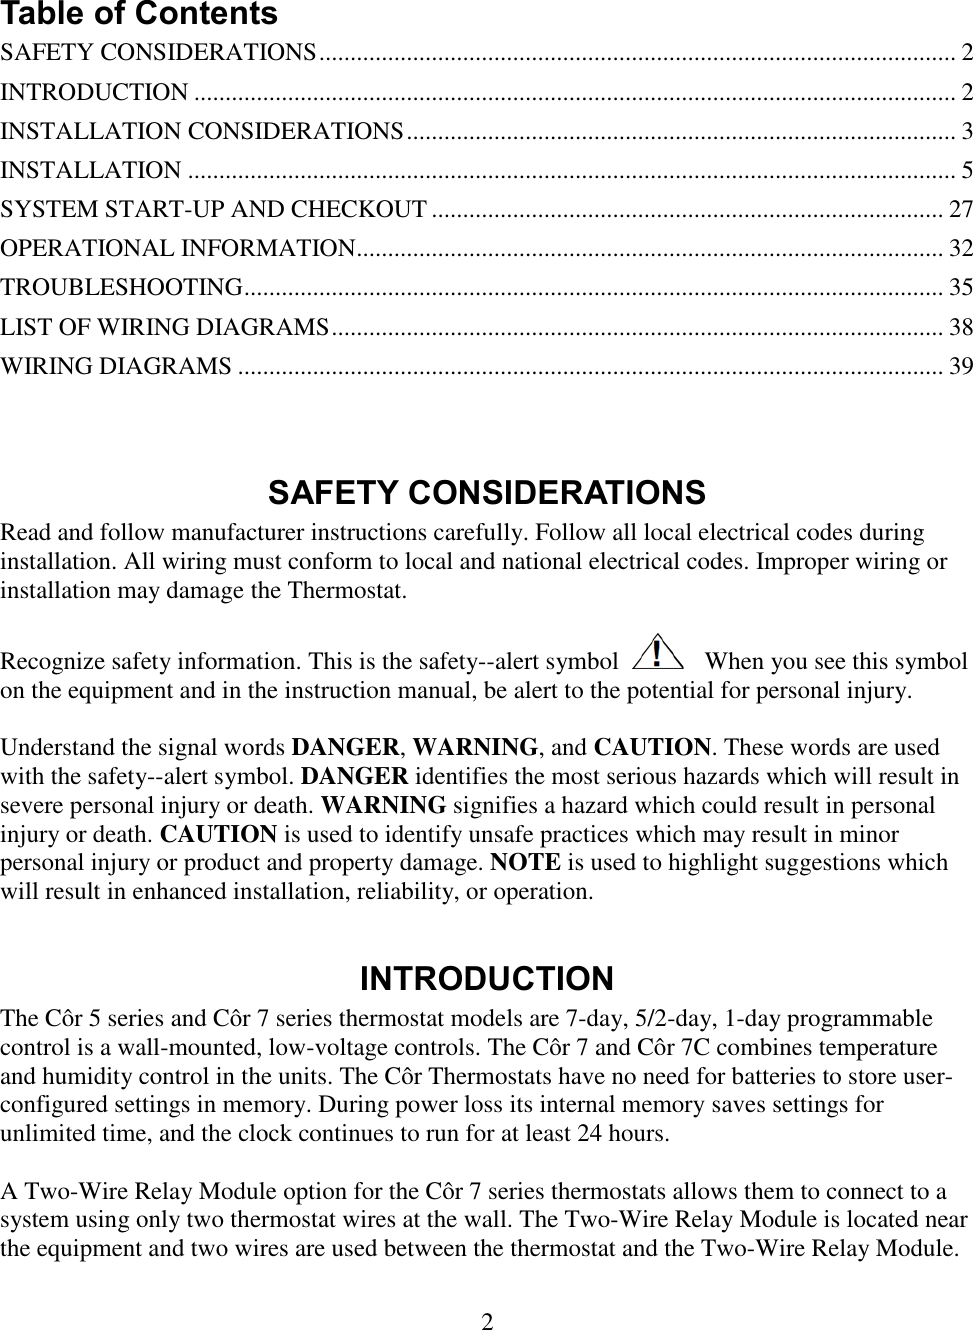 2   Table of Contents SAFETY CONSIDERATIONS ...................................................................................................... 2 INTRODUCTION .......................................................................................................................... 2 INSTALLATION CONSIDERATIONS ........................................................................................ 3 INSTALLATION ........................................................................................................................... 5 SYSTEM START-UP AND CHECKOUT .................................................................................. 27 OPERATIONAL INFORMATION.............................................................................................. 32 TROUBLESHOOTING ................................................................................................................ 35 LIST OF WIRING DIAGRAMS .................................................................................................. 38 WIRING DIAGRAMS ................................................................................................................. 39   SAFETY CONSIDERATIONS Read and follow manufacturer instructions carefully. Follow all local electrical codes during installation. All wiring must conform to local and national electrical codes. Improper wiring or installation may damage the Thermostat.  Recognize safety information. This is the safety--alert symbol      When you see this symbol on the equipment and in the instruction manual, be alert to the potential for personal injury.   Understand the signal words DANGER, WARNING, and CAUTION. These words are used with the safety--alert symbol. DANGER identifies the most serious hazards which will result in severe personal injury or death. WARNING signifies a hazard which could result in personal injury or death. CAUTION is used to identify unsafe practices which may result in minor personal injury or product and property damage. NOTE is used to highlight suggestions which will result in enhanced installation, reliability, or operation.  INTRODUCTION The Côr 5 series and Côr 7 series thermostat models are 7-day, 5/2-day, 1-day programmable control is a wall-mounted, low-voltage controls. The Côr 7 and Côr 7C combines temperature and humidity control in the units. The Côr Thermostats have no need for batteries to store user-configured settings in memory. During power loss its internal memory saves settings for unlimited time, and the clock continues to run for at least 24 hours.   A Two-Wire Relay Module option for the Côr 7 series thermostats allows them to connect to a system using only two thermostat wires at the wall. The Two-Wire Relay Module is located near the equipment and two wires are used between the thermostat and the Two-Wire Relay Module.  